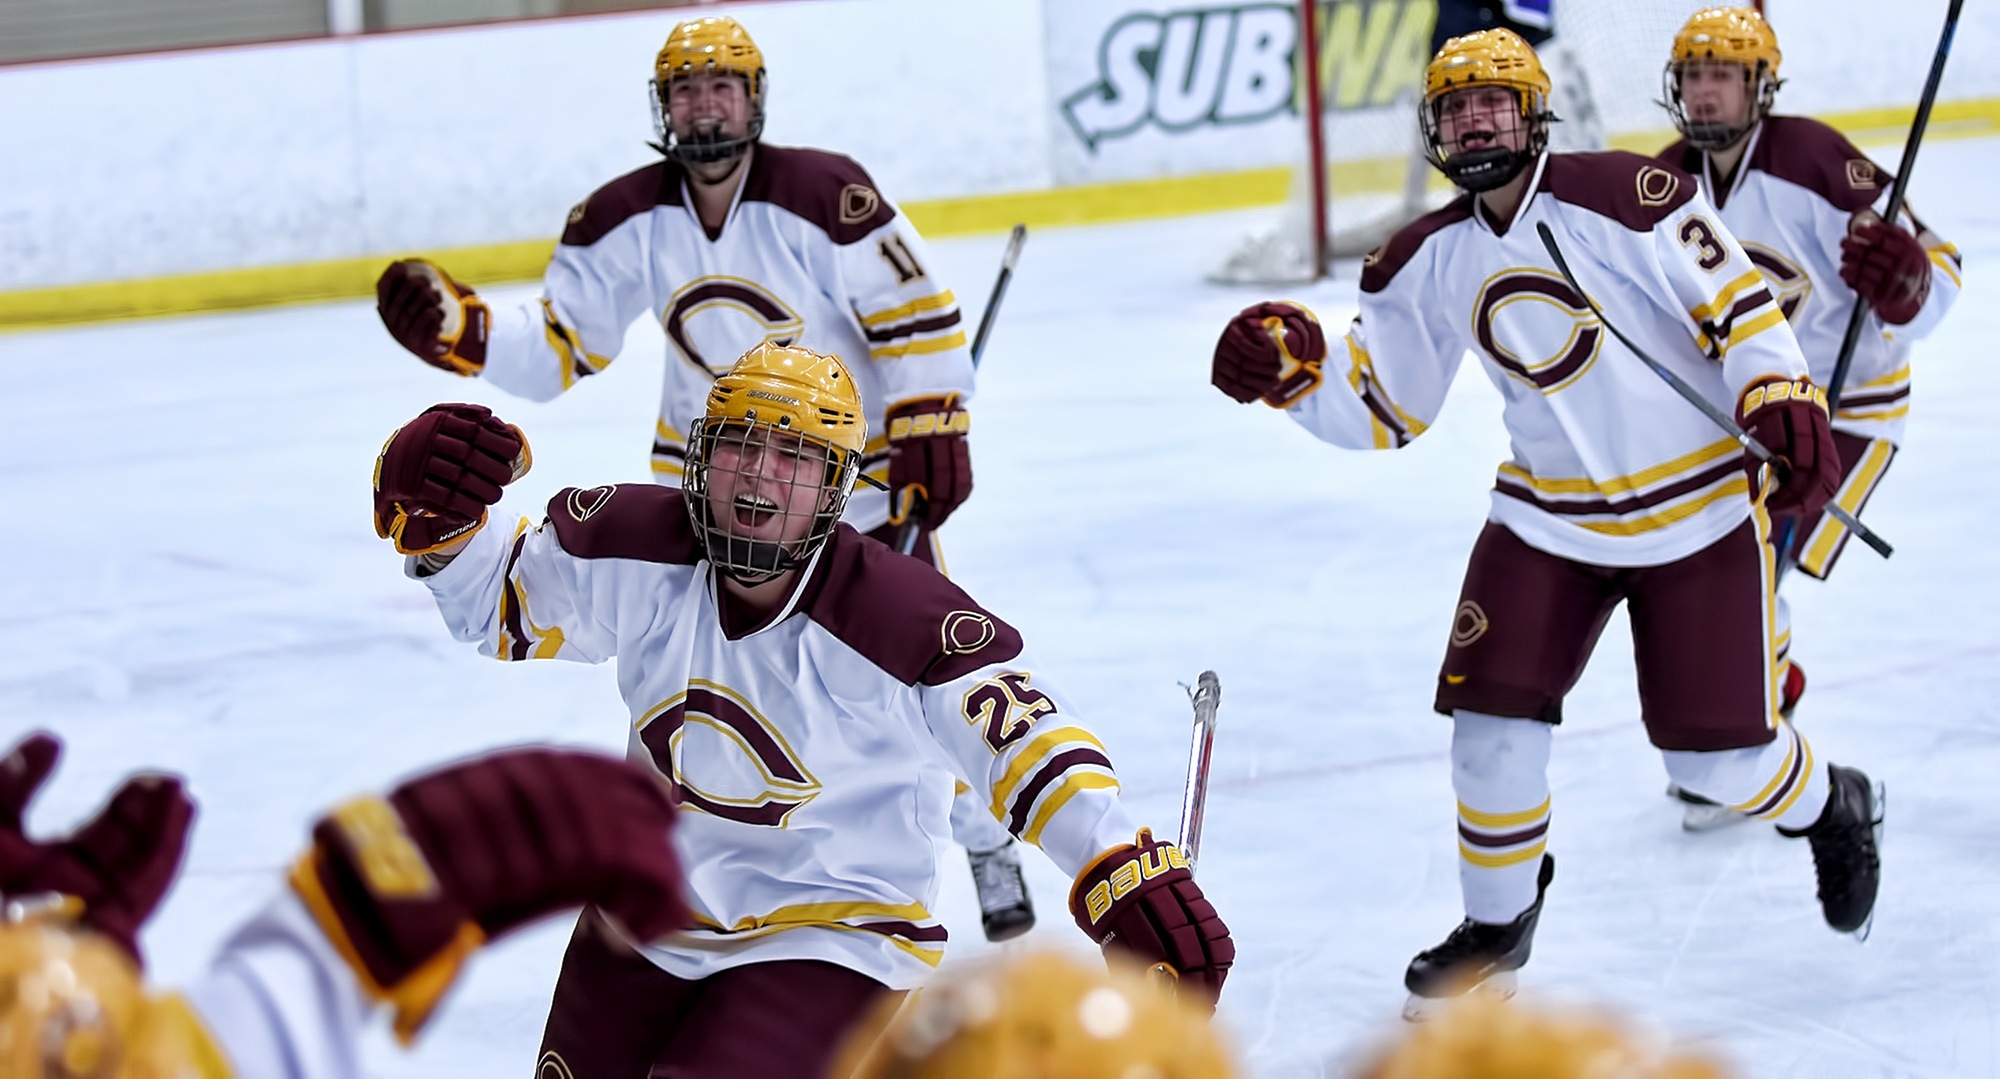 Sophomore Anna Ballweber celebrates her game-winning goal in the Cobbers' 1-0 win over Finlandia on Saturday.